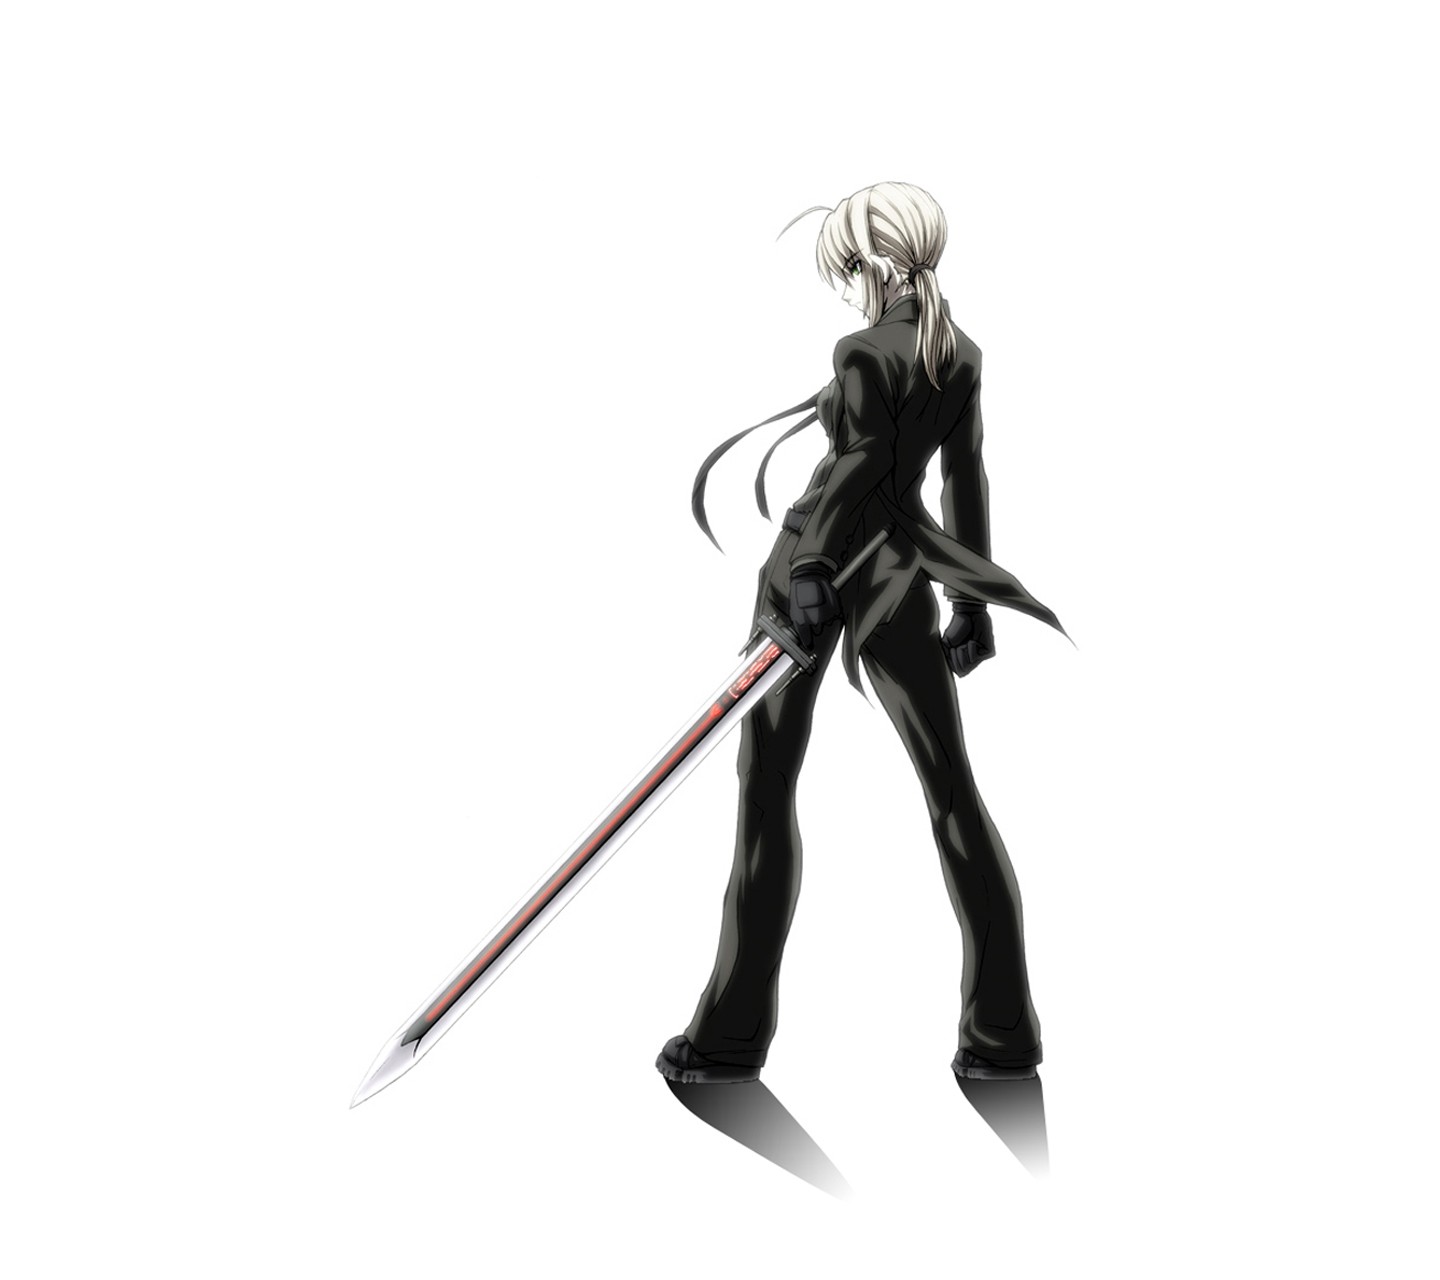 Anime 1440x1280 Saber Fate/Zero anime selective coloring anime girls women standing women with swords simple background white background